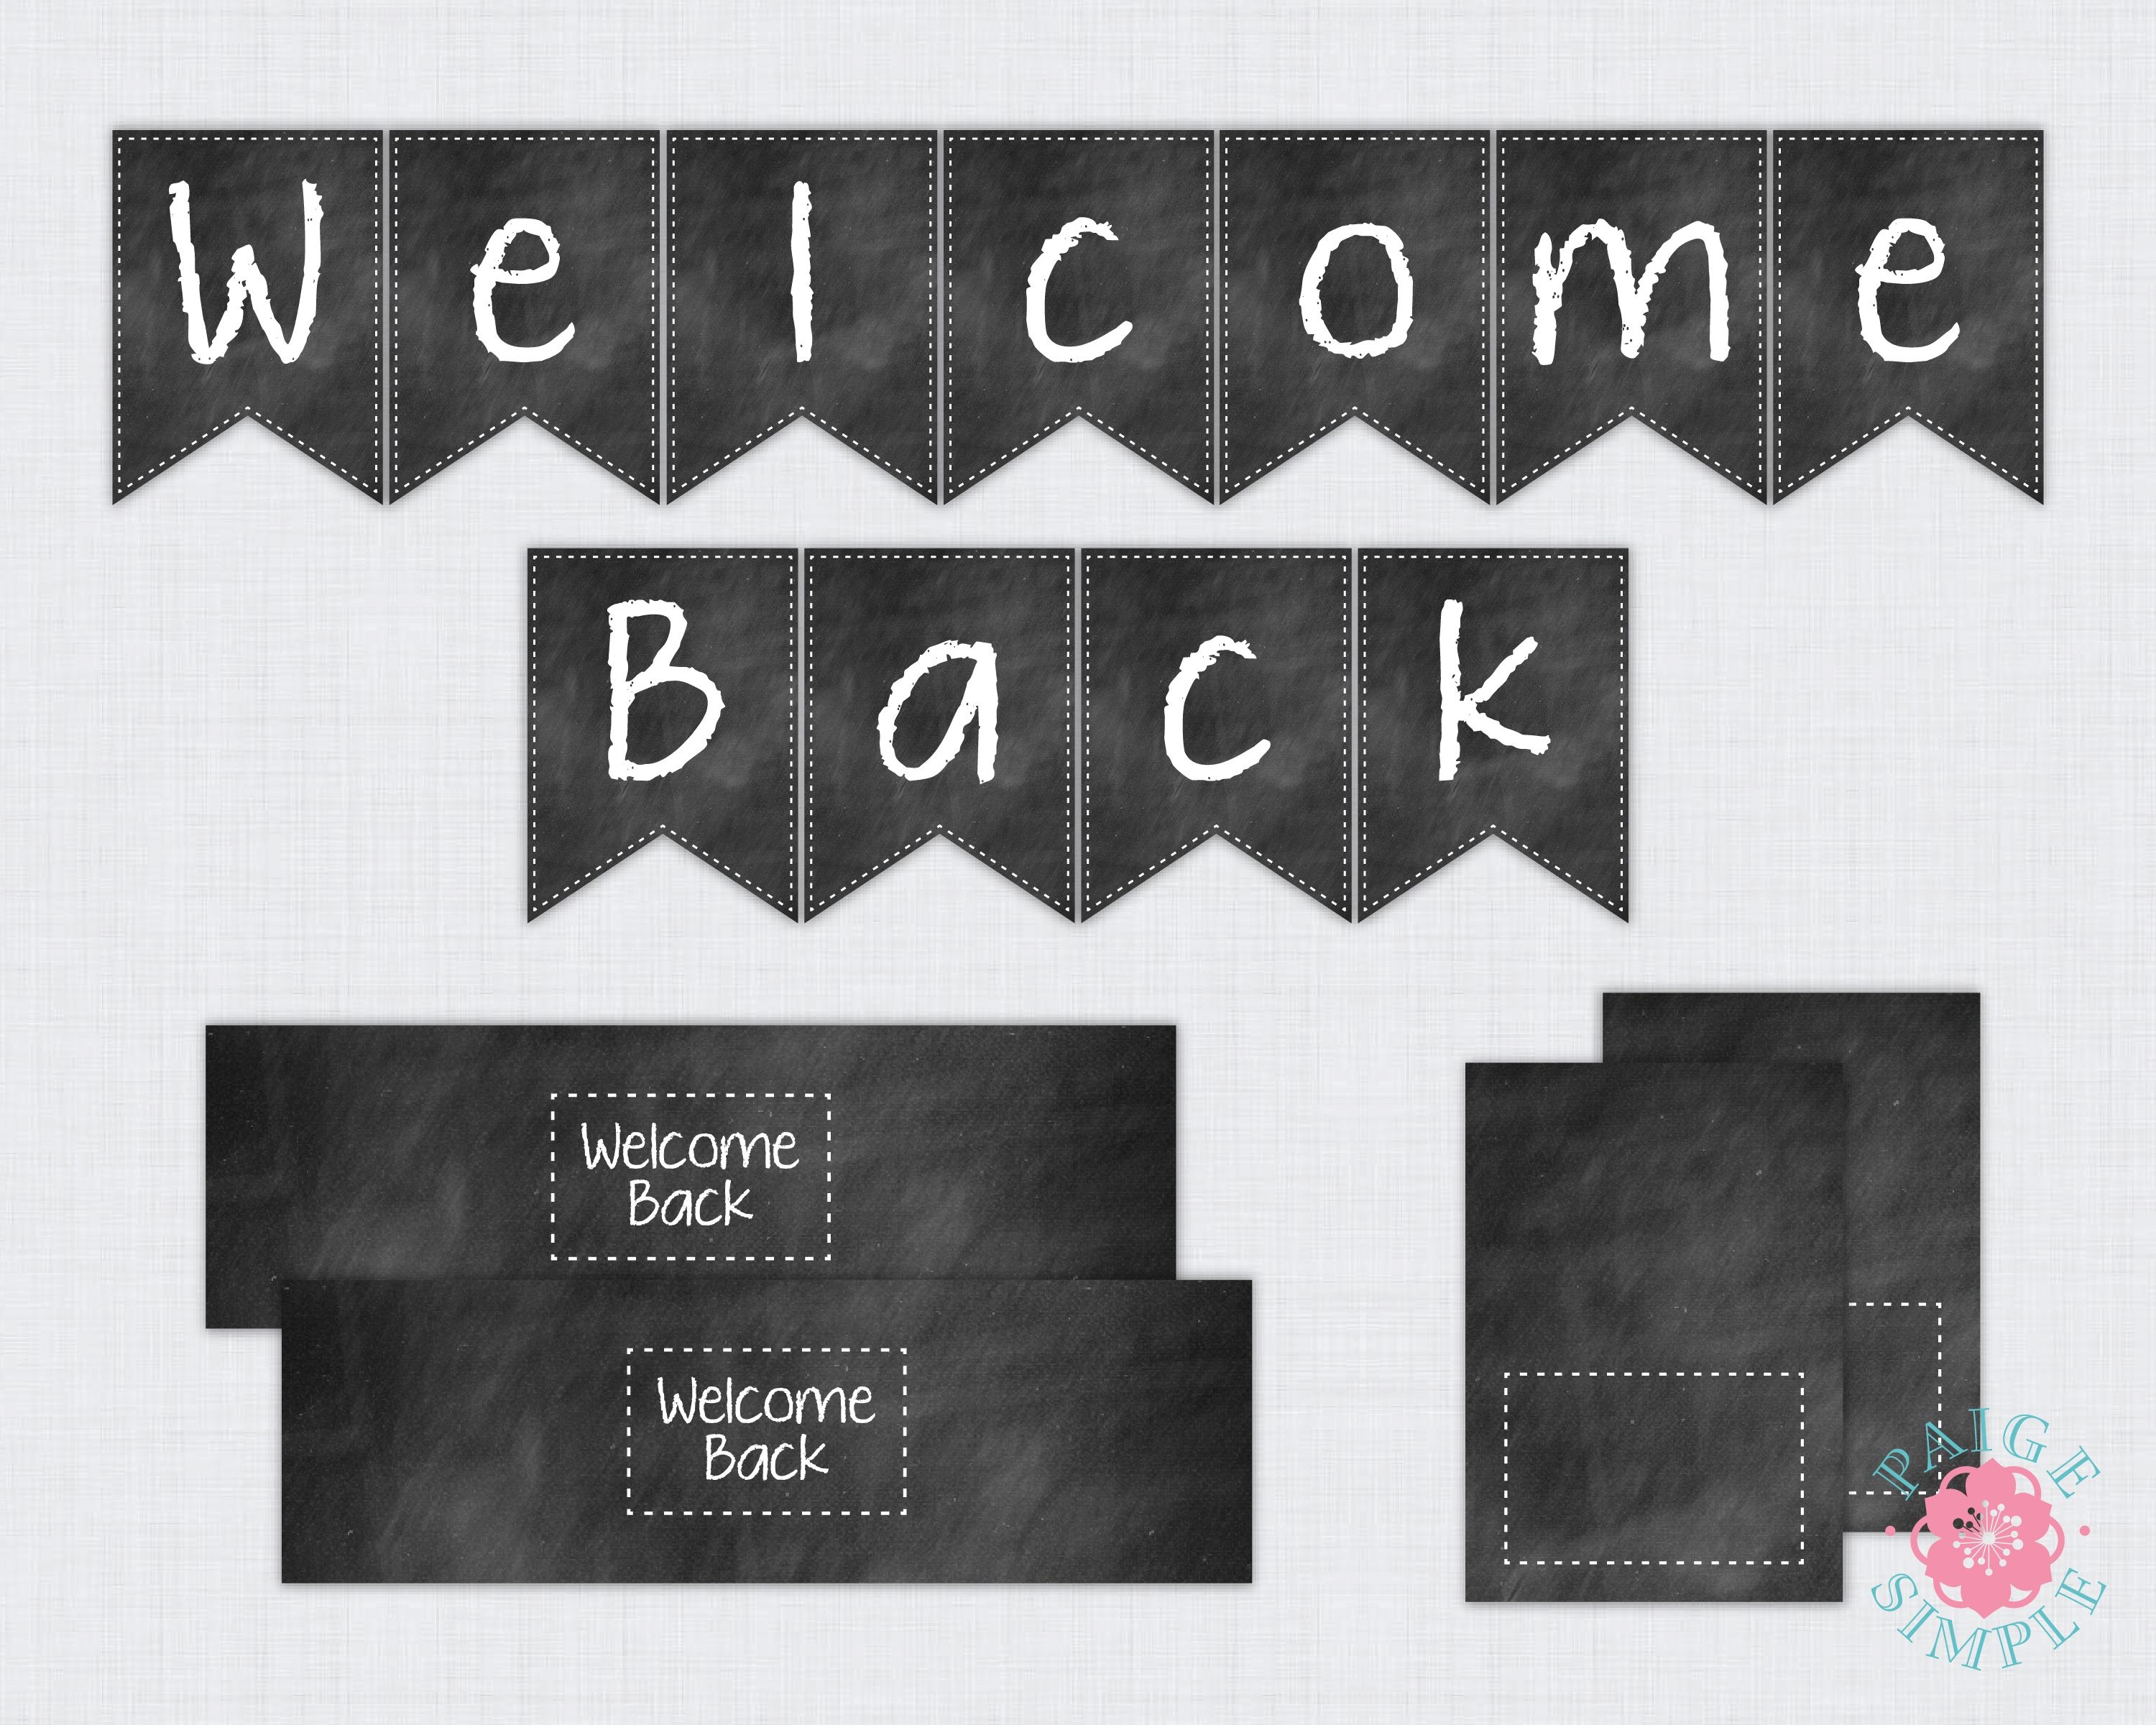 Free Printable Welcome Back To School Banner | Bulletin Boards - Welcome Back Banner Printable Free